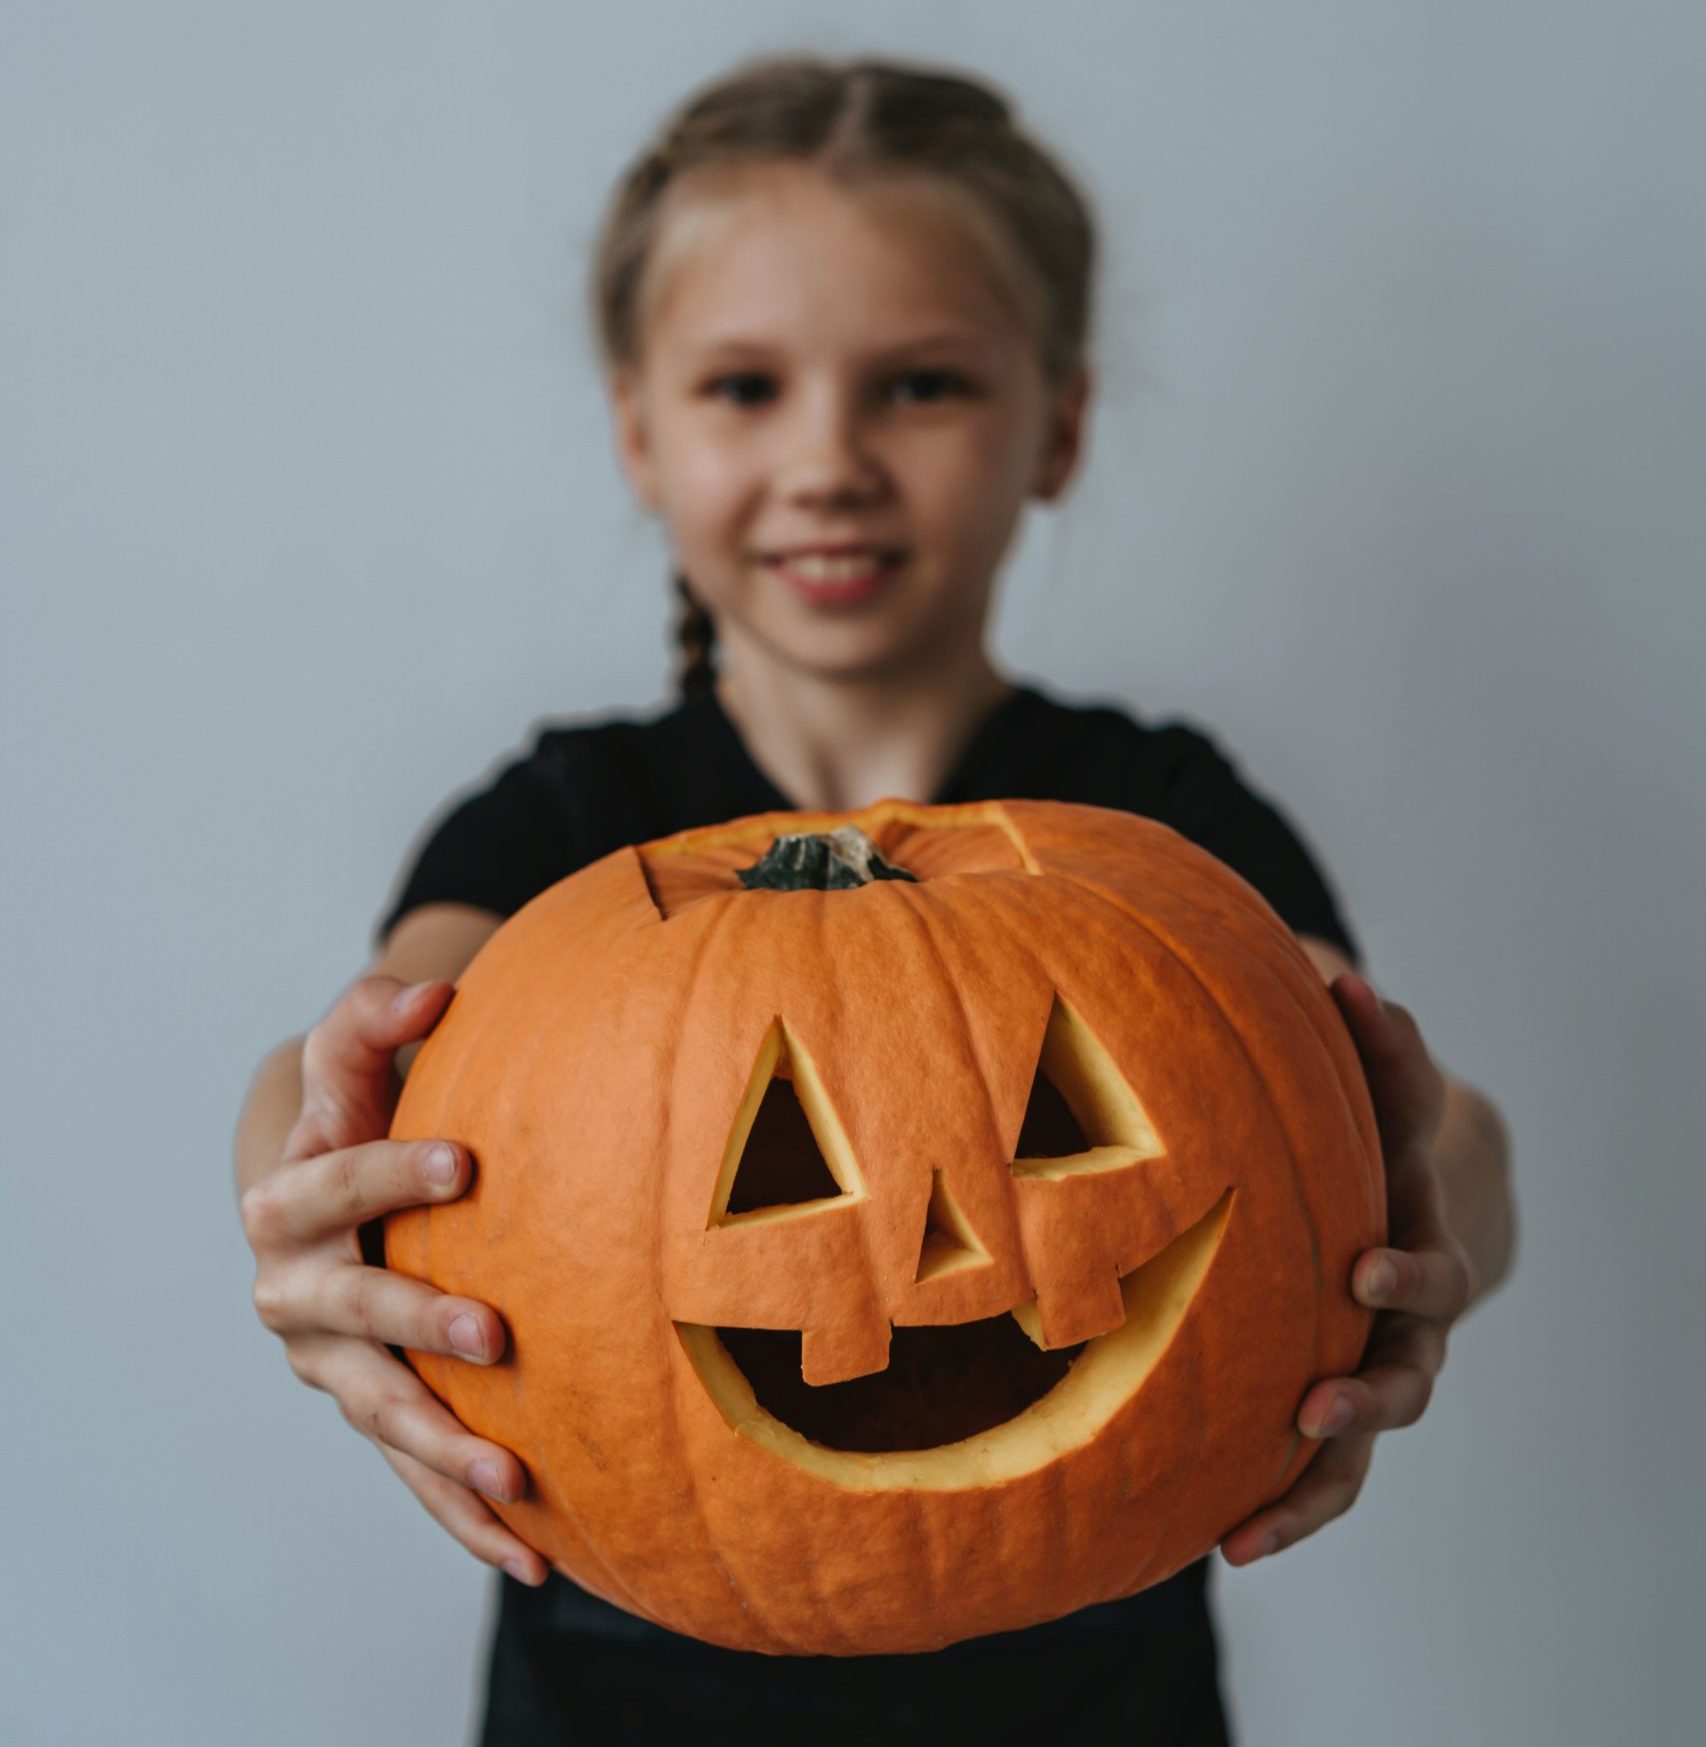 Child holding a carved pumpkin